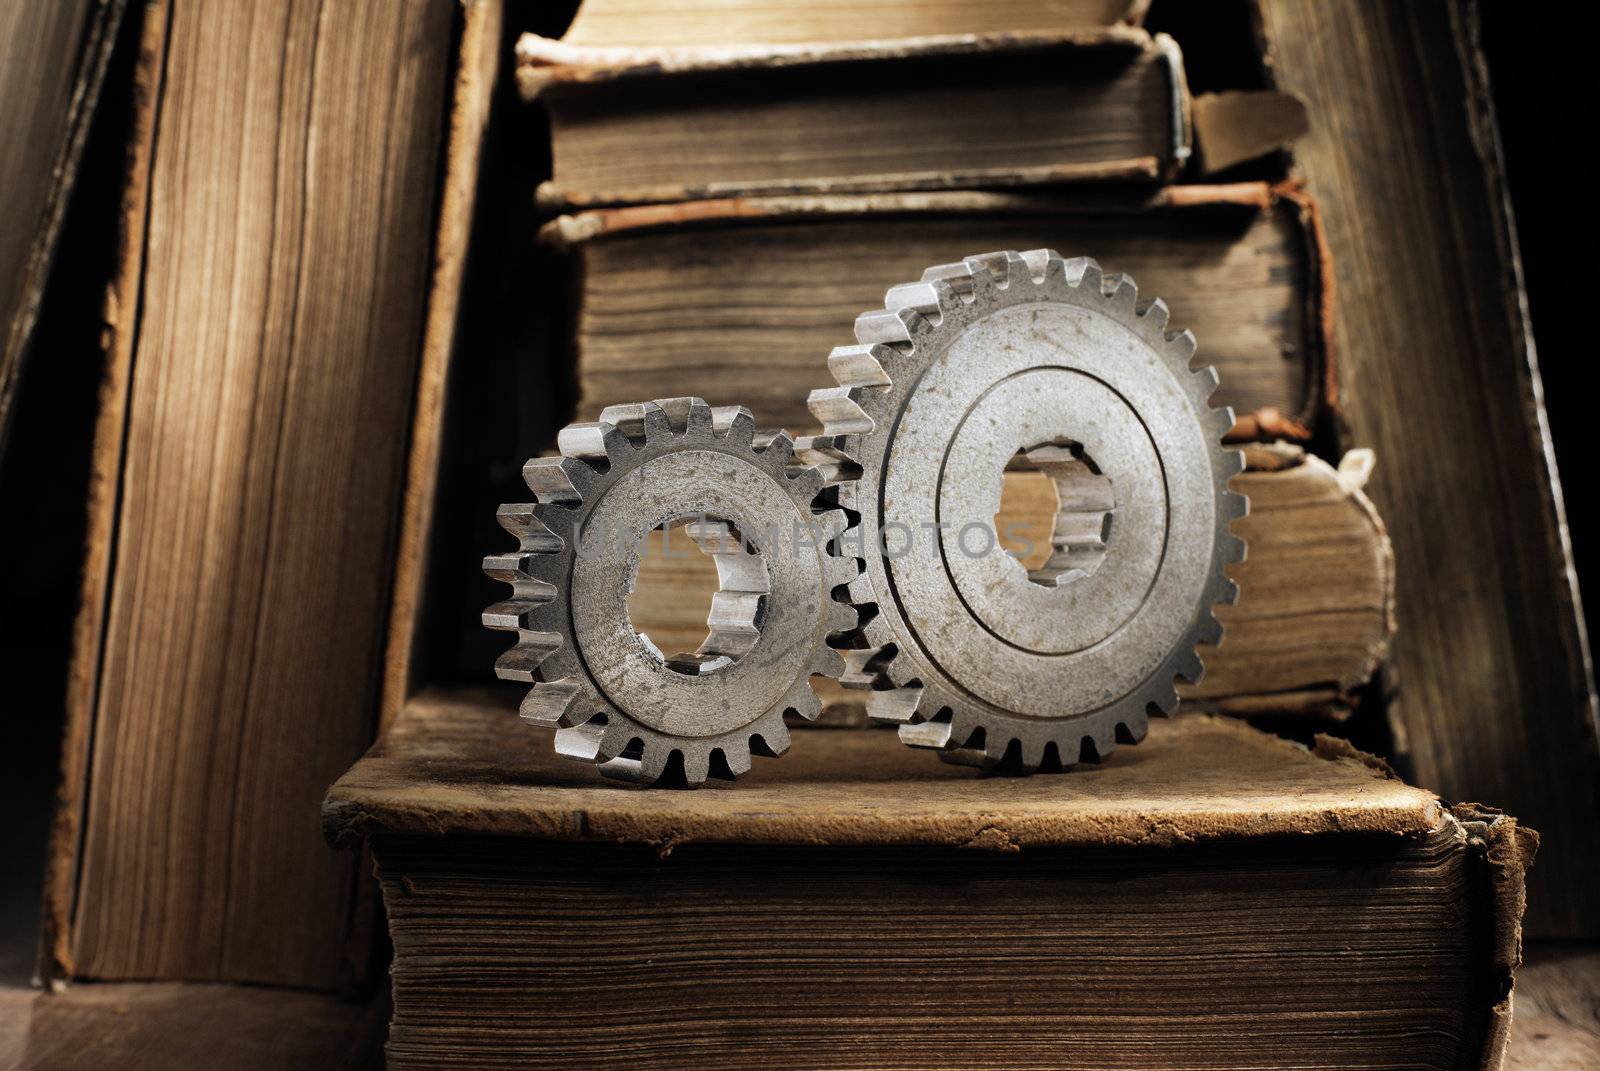 Still life with old metallic cog gears and antique books. Short depth of field.